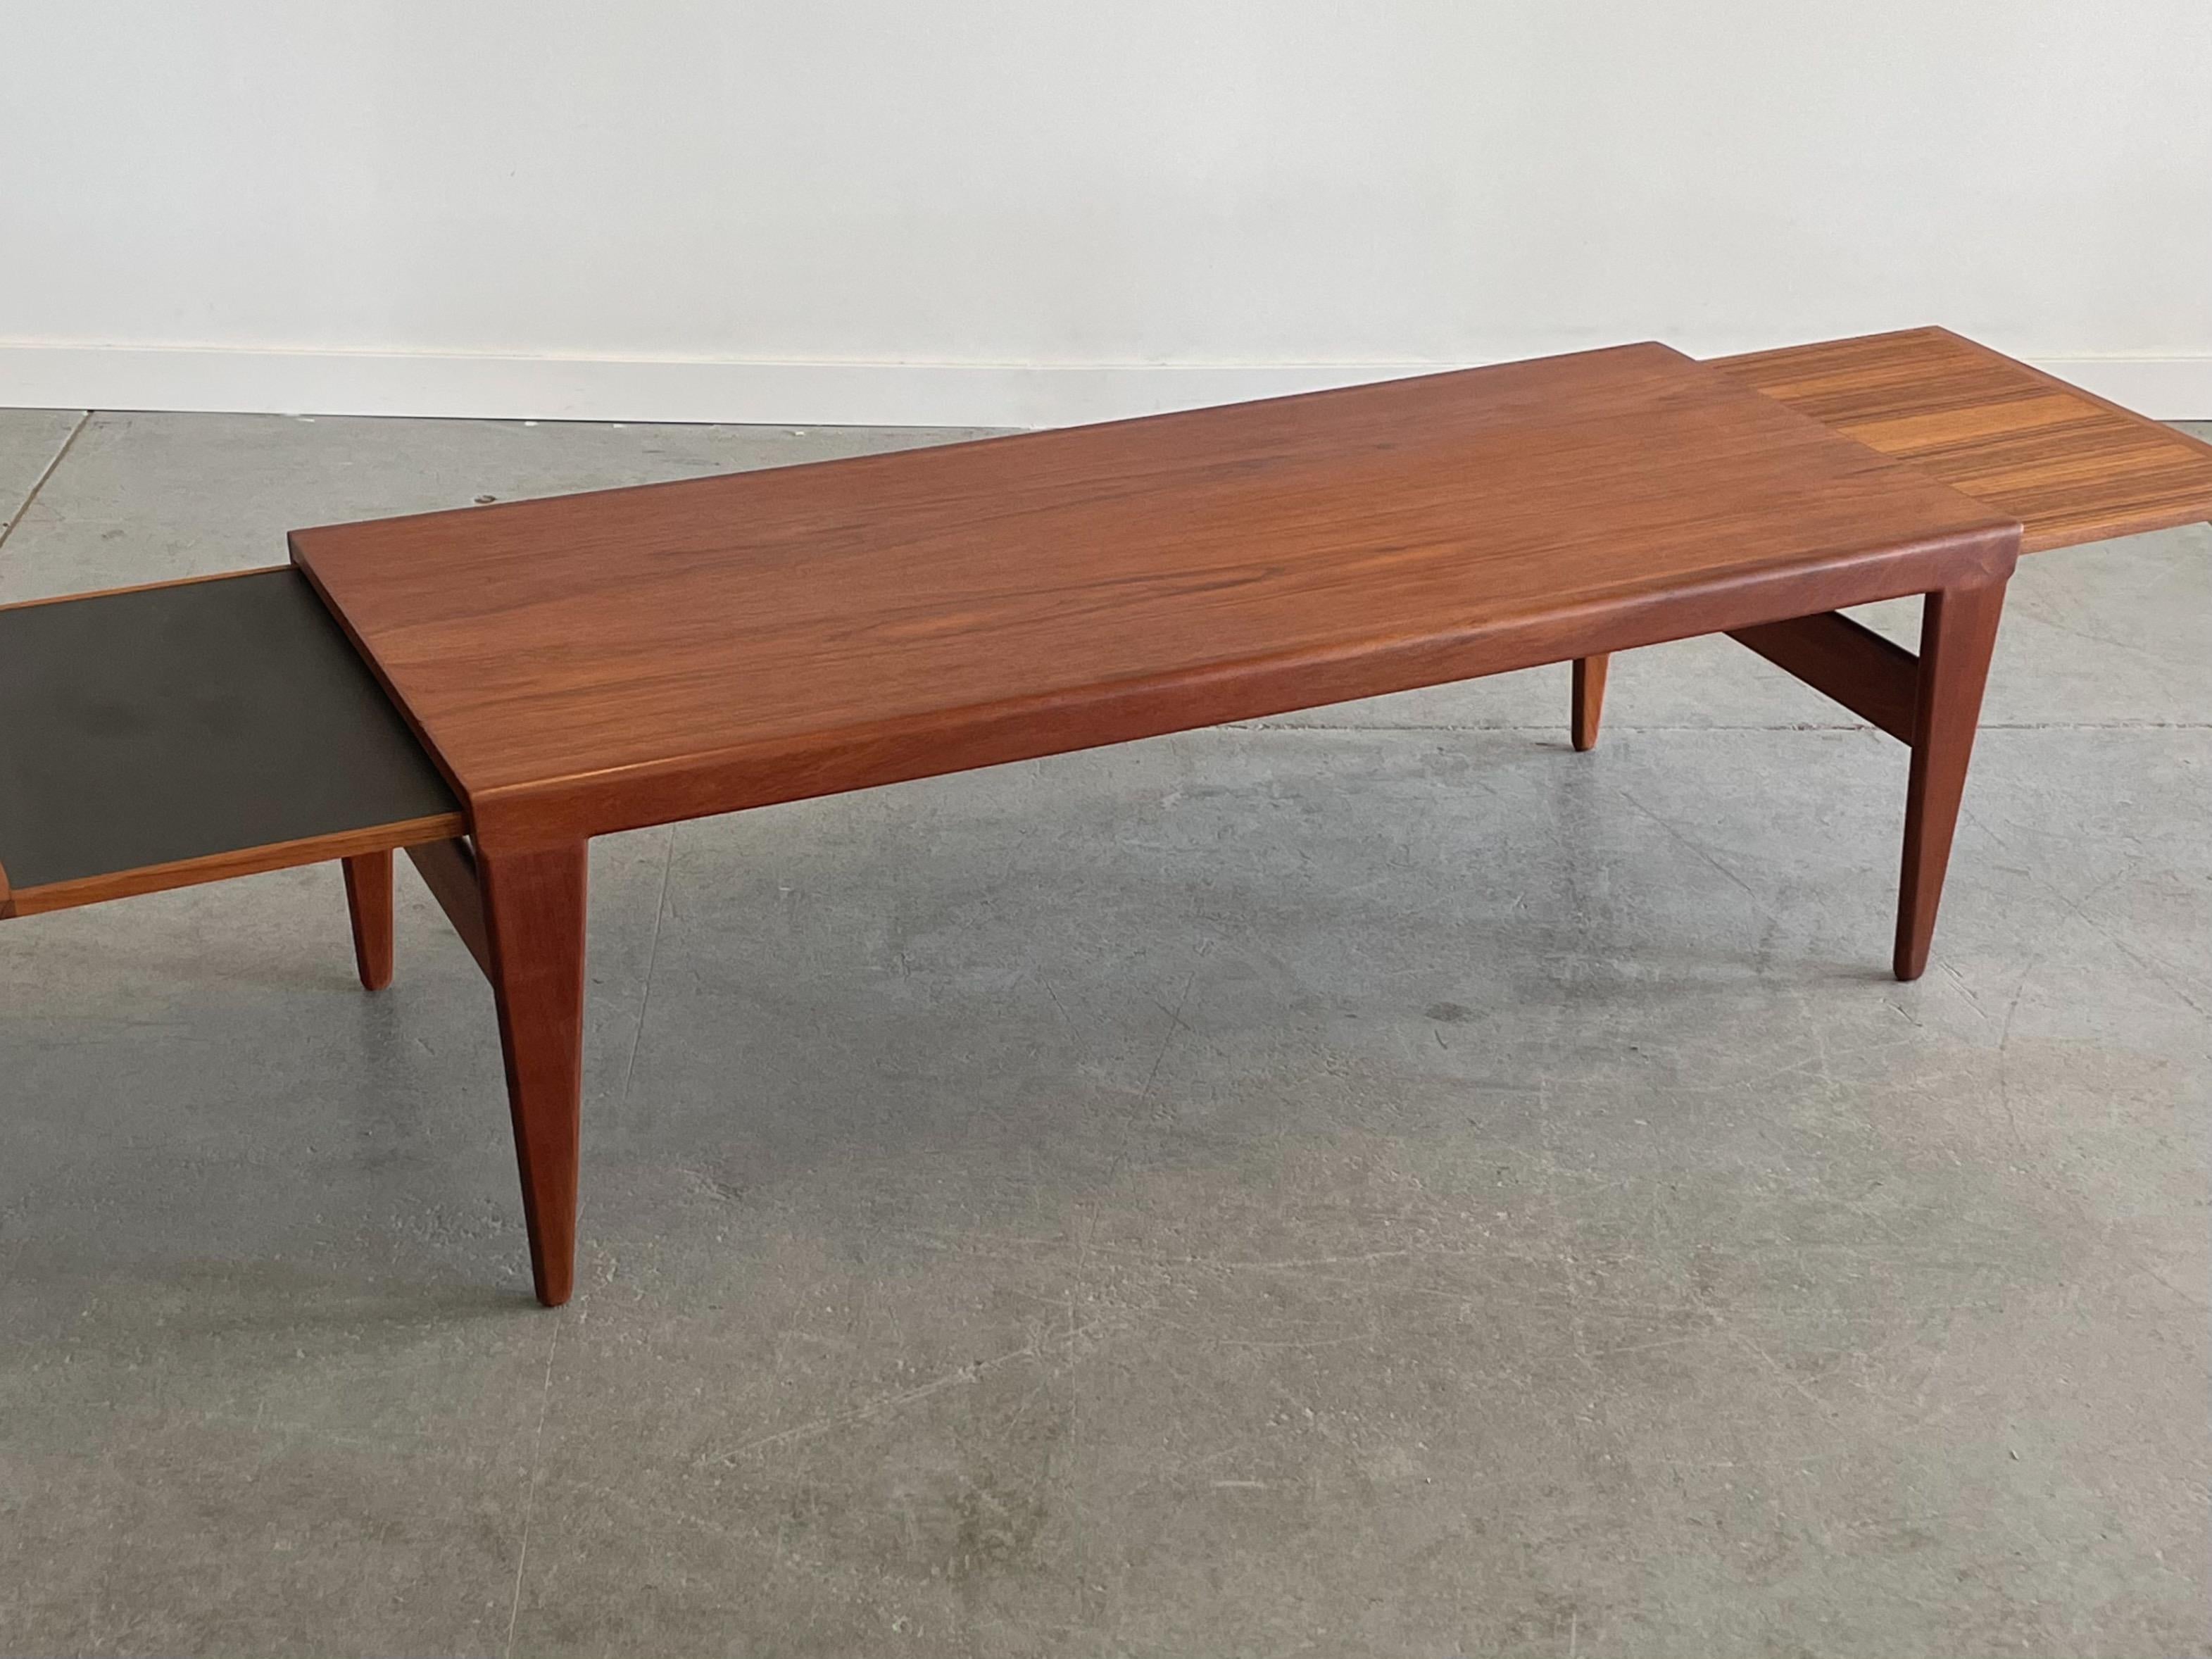 Expanding teak coffee table designed by Illum Wikkelso for Koefoeds, Denmark. This piece features a substantial and beautifully sculpted profile with nicely tapered legs. There is a pull-out for expansion on each side, one with black laminate.